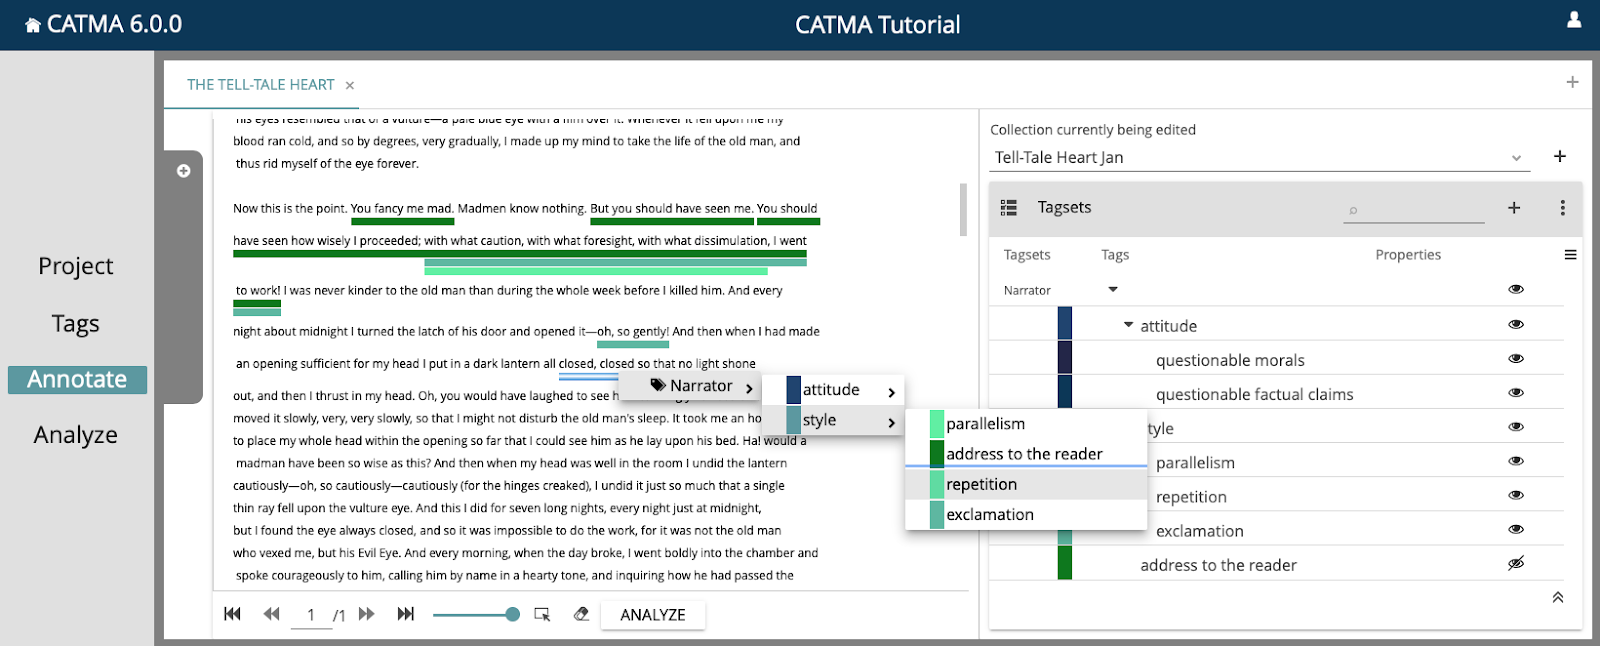 Annotations-Editor in CATMA.